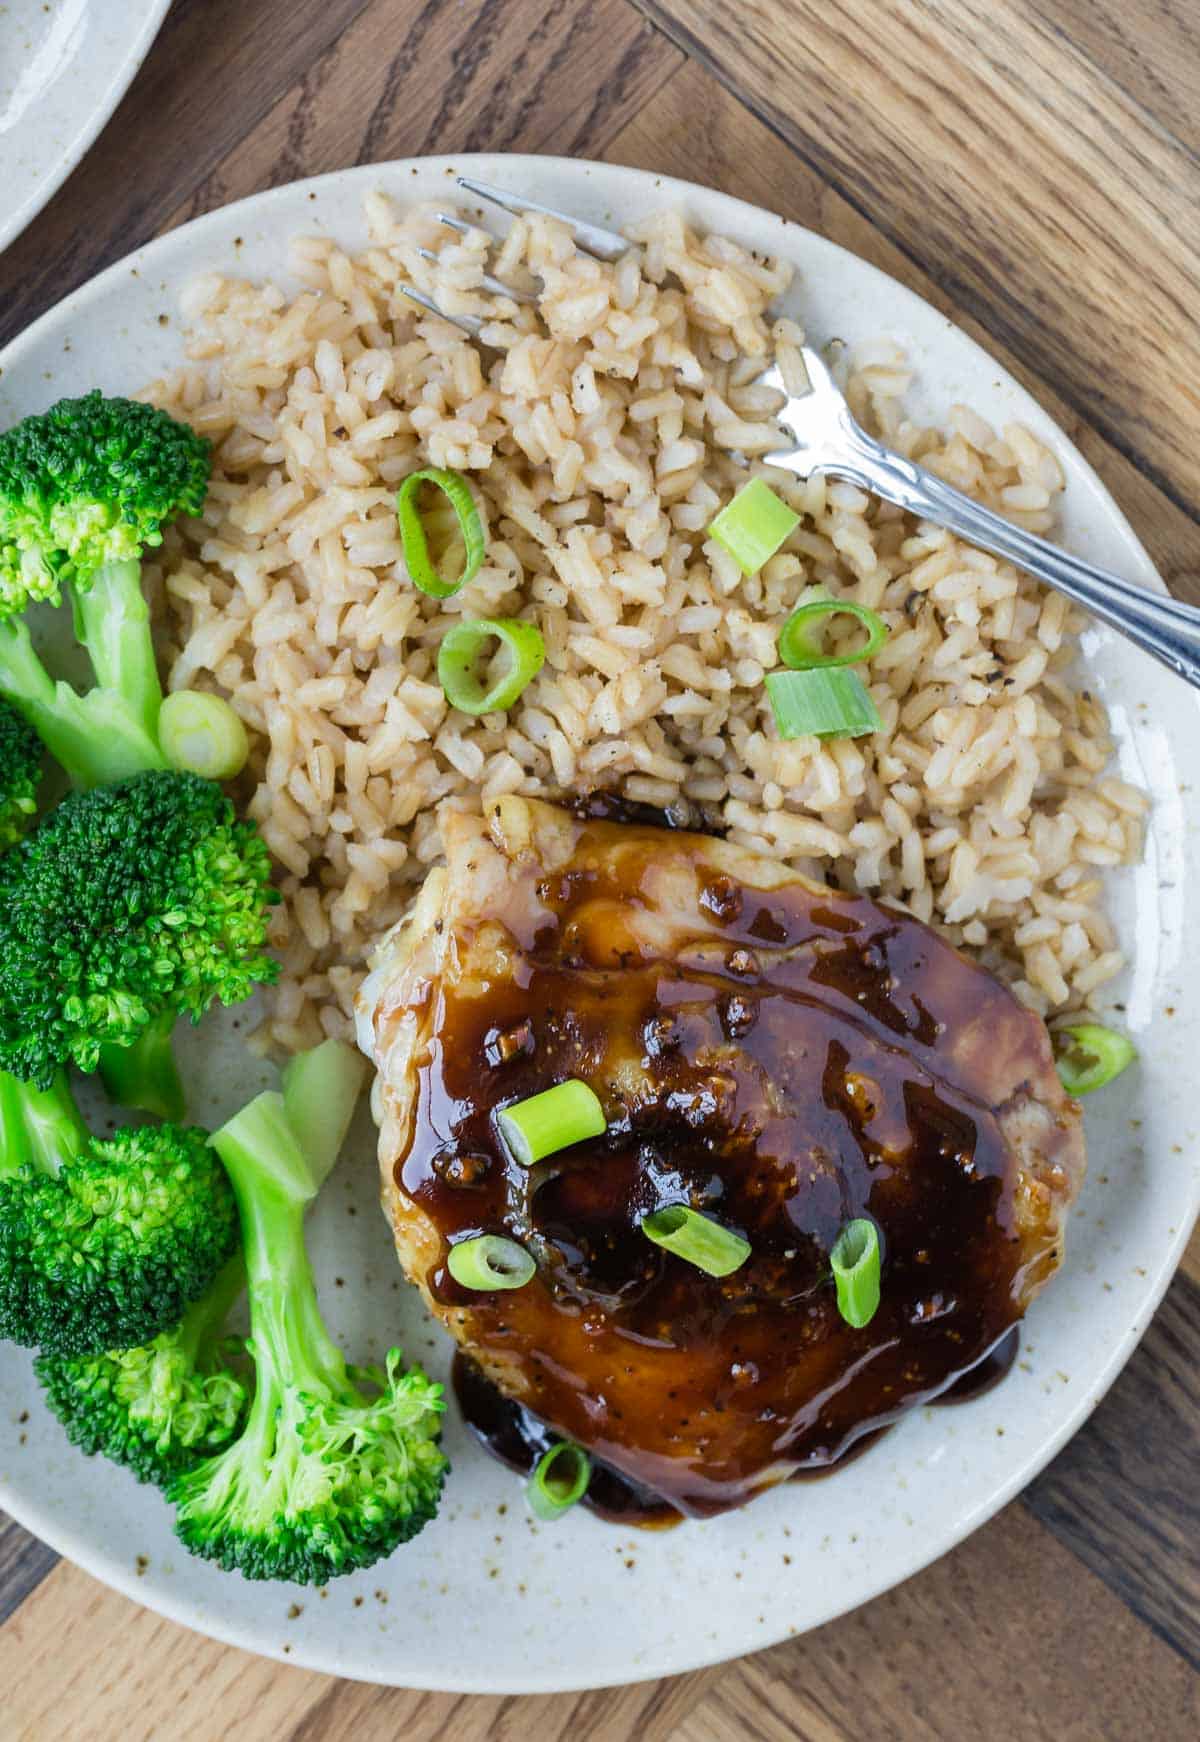 Overhead view of a chicken thigh on a plate with rice and broccoli. Everything is garnished with green onions.